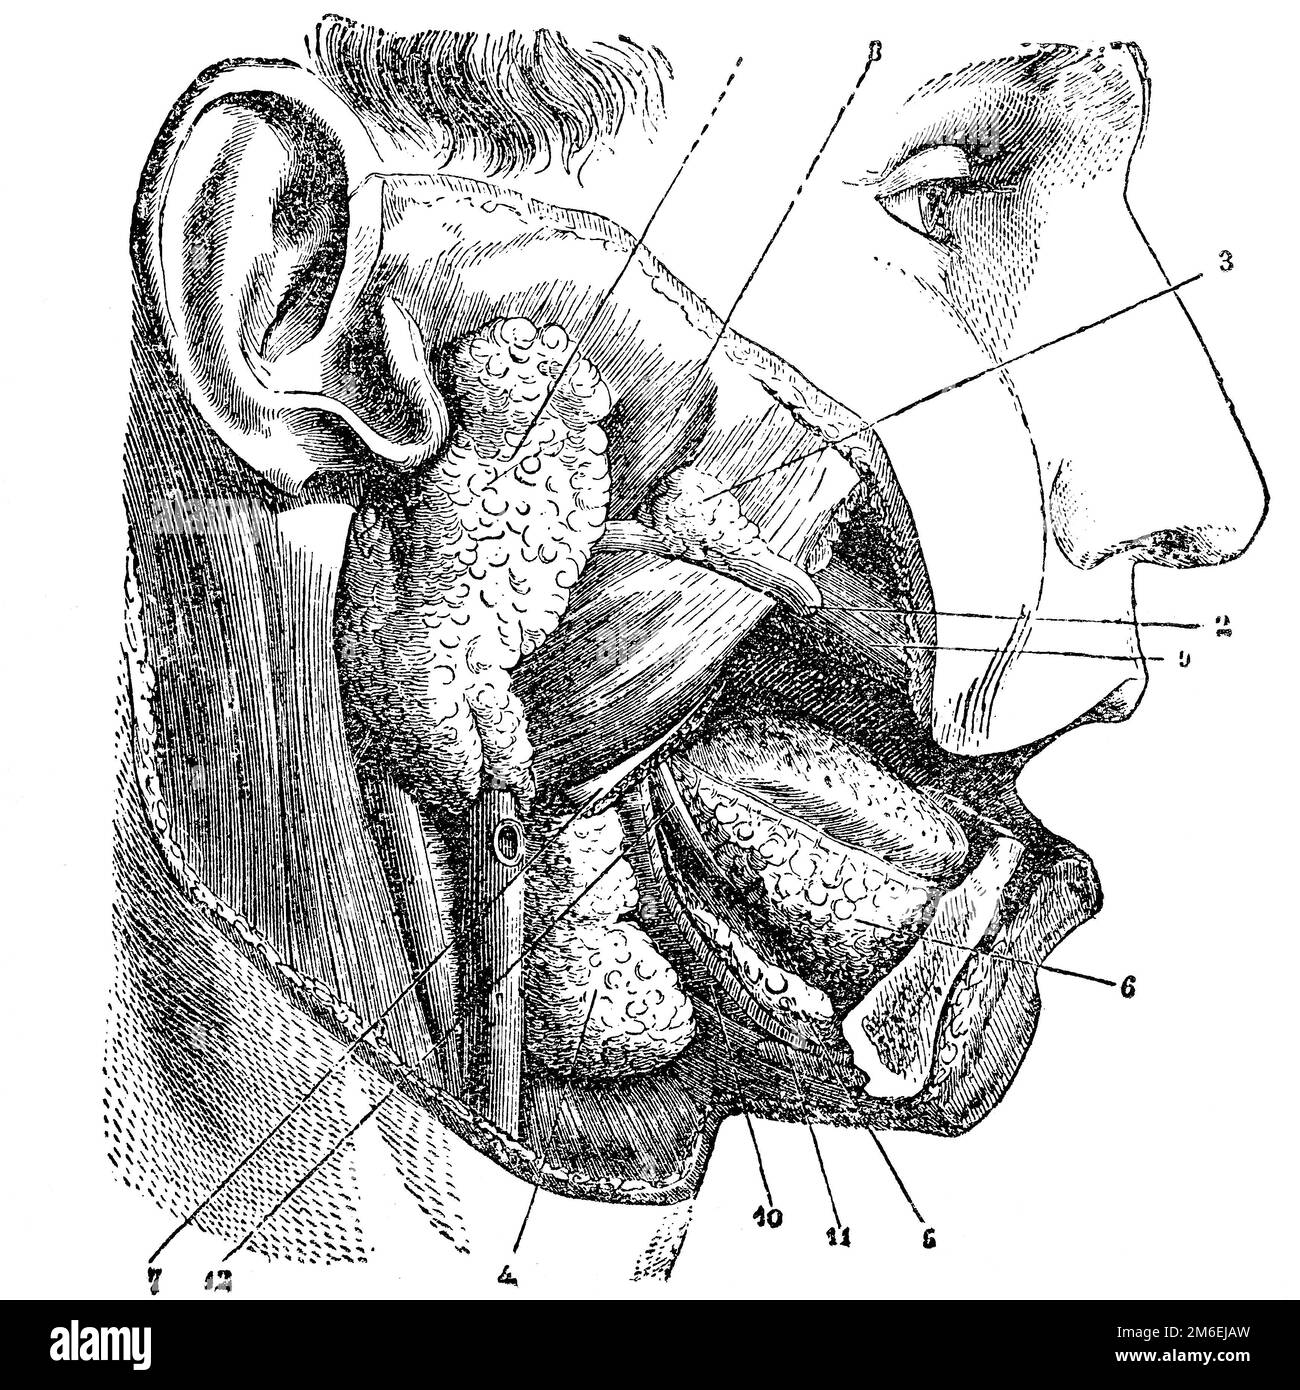 Oral cavity and salivary glands. Antique illustration from a medical book. 1889. Stock Photo